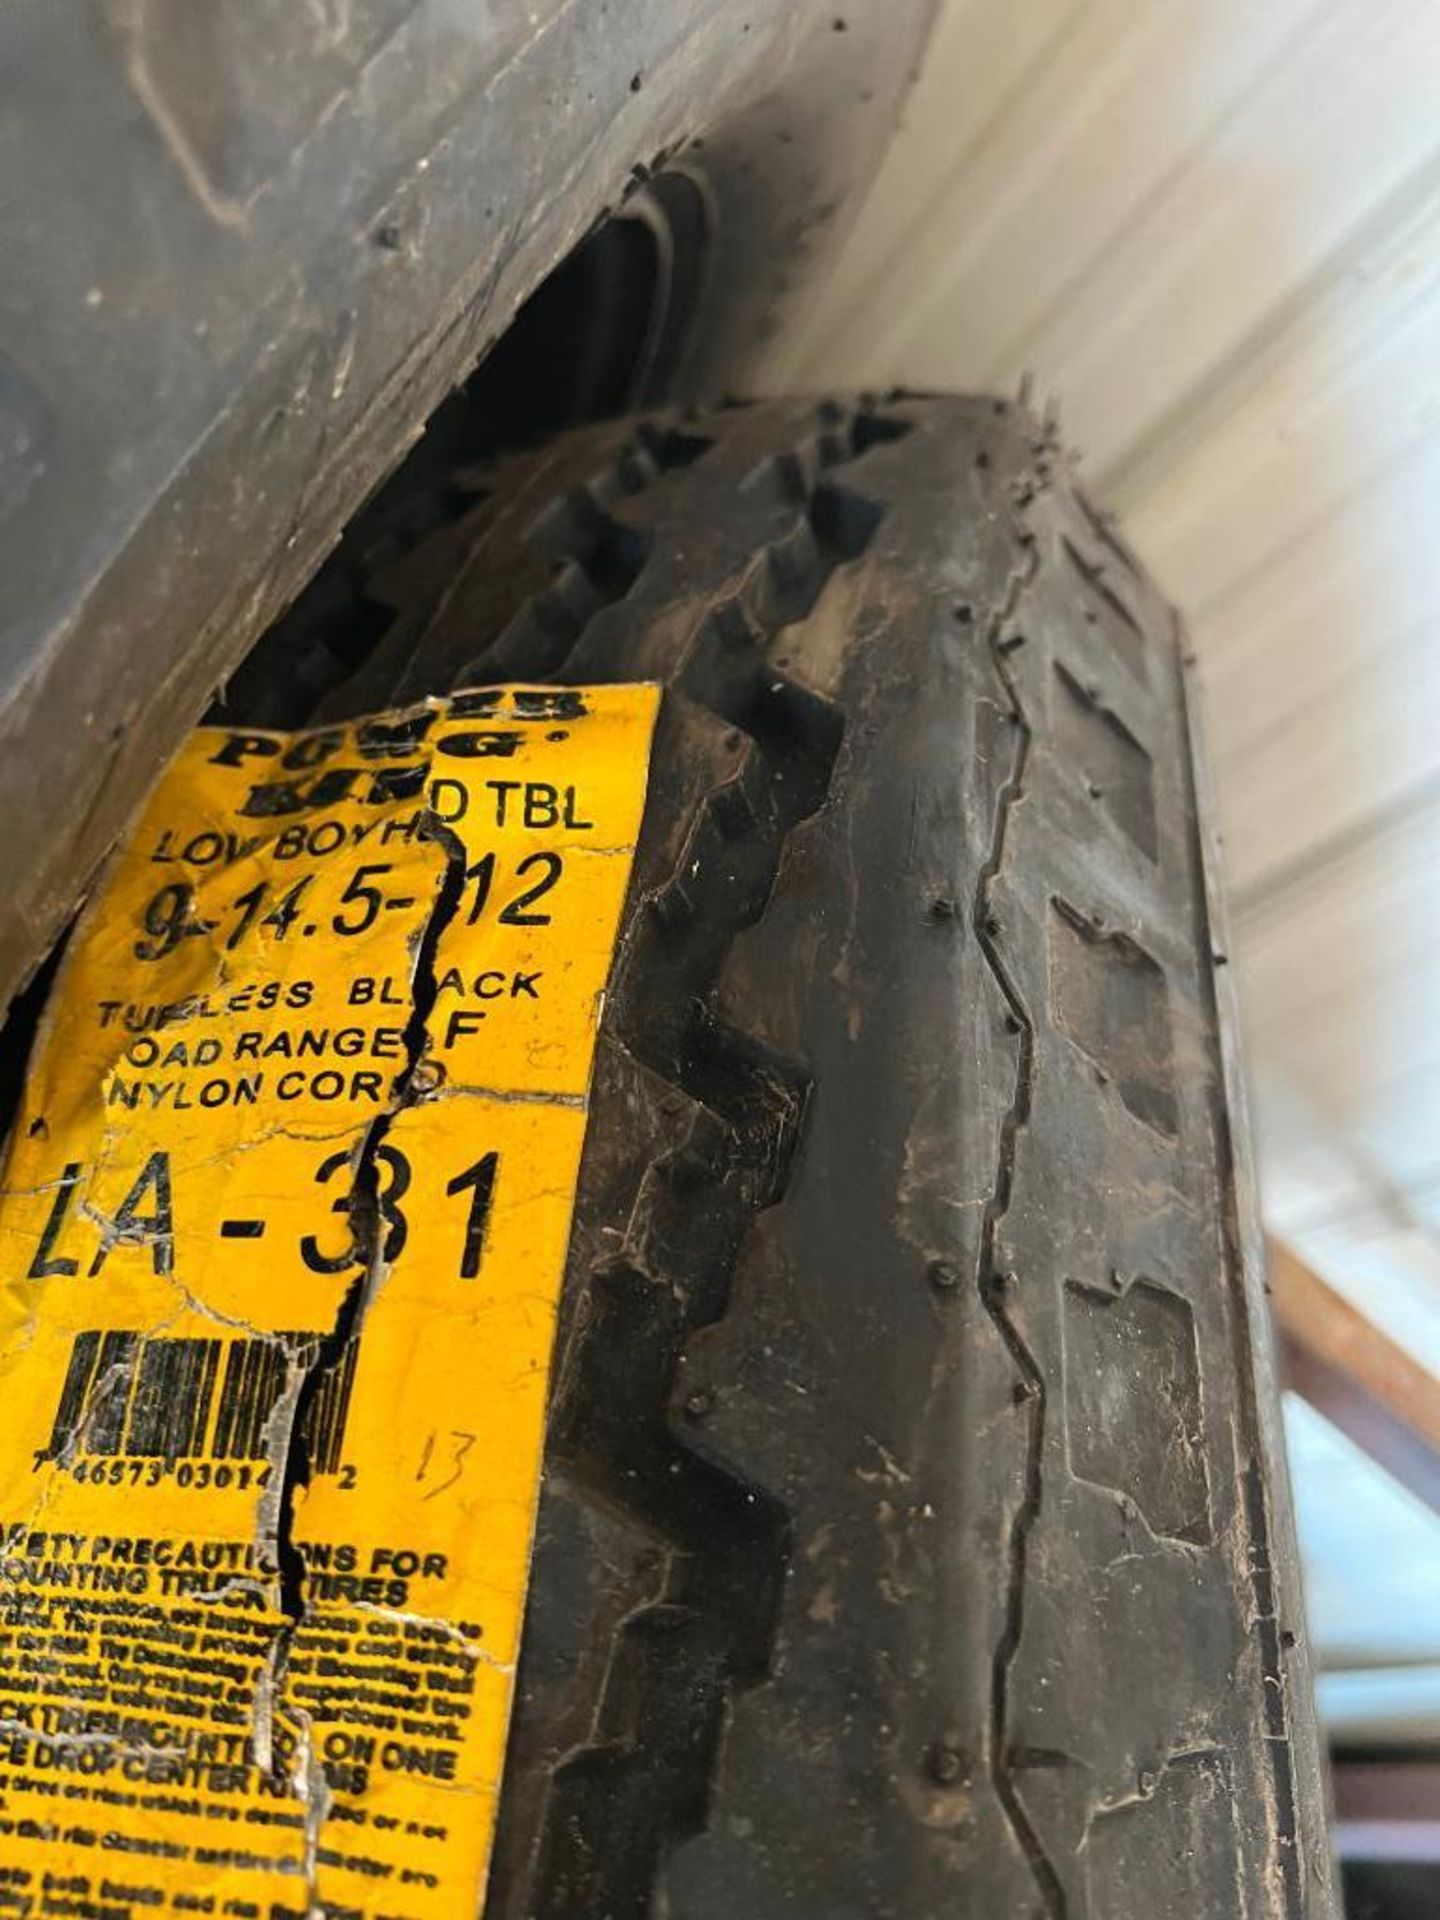 (3) New 9-14.5-12 Power King Lowboy HD Tubeless Tires, Load Range F & (1) Used Tire. Located in Alta - Image 2 of 2